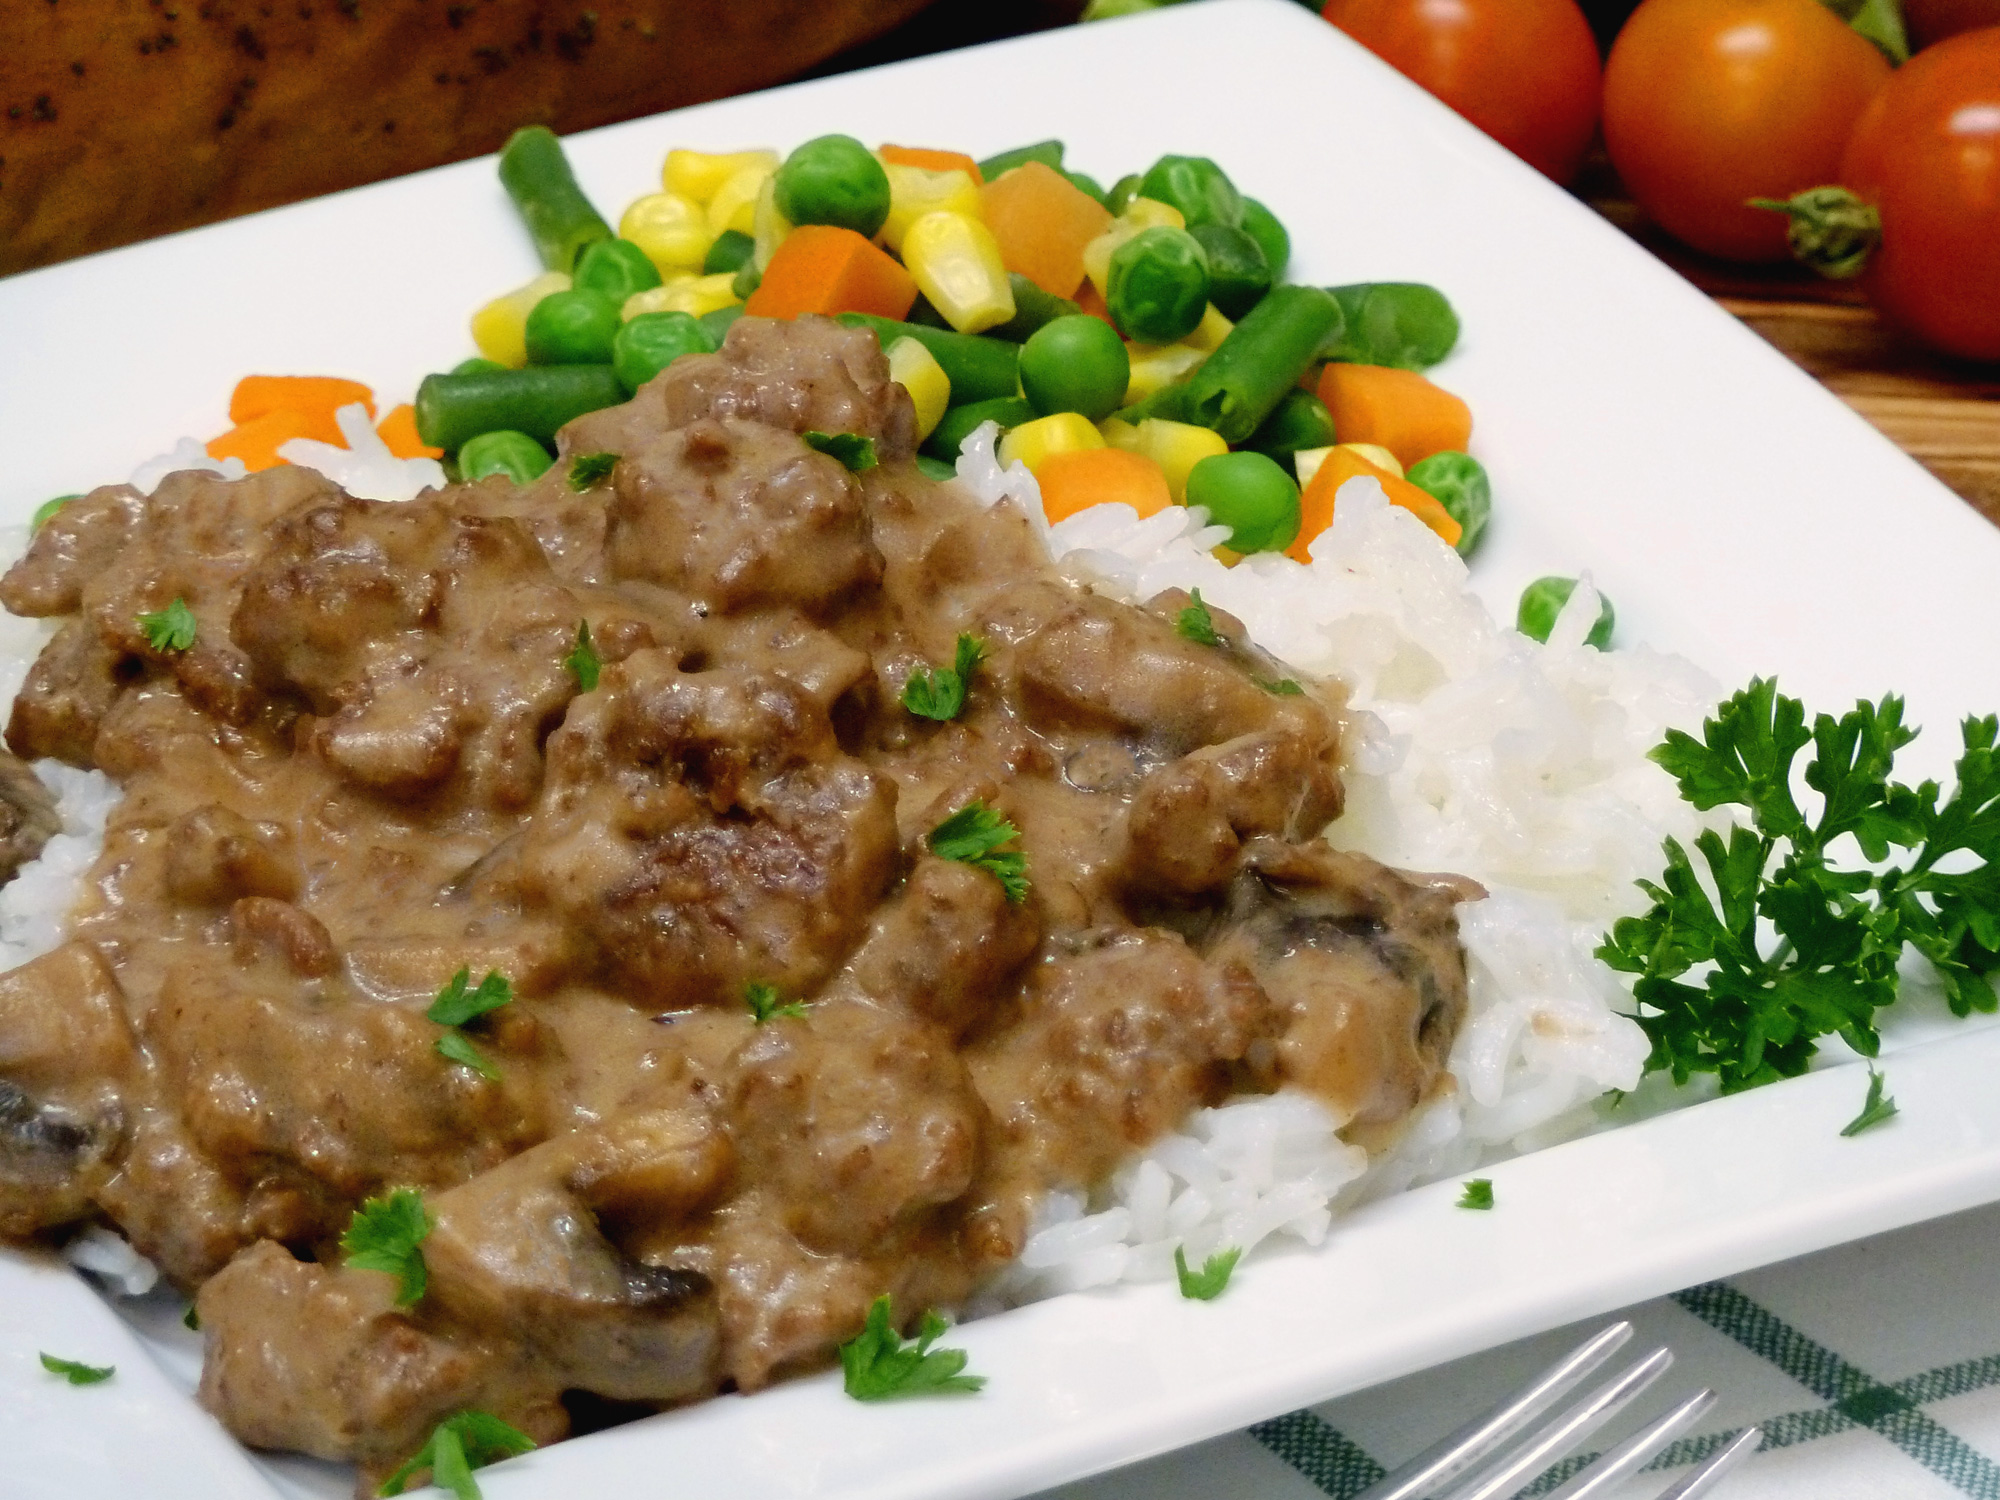 Ground beef, sausage, and mushrooms make a chunky stroganoff perfect over rice or noodles.